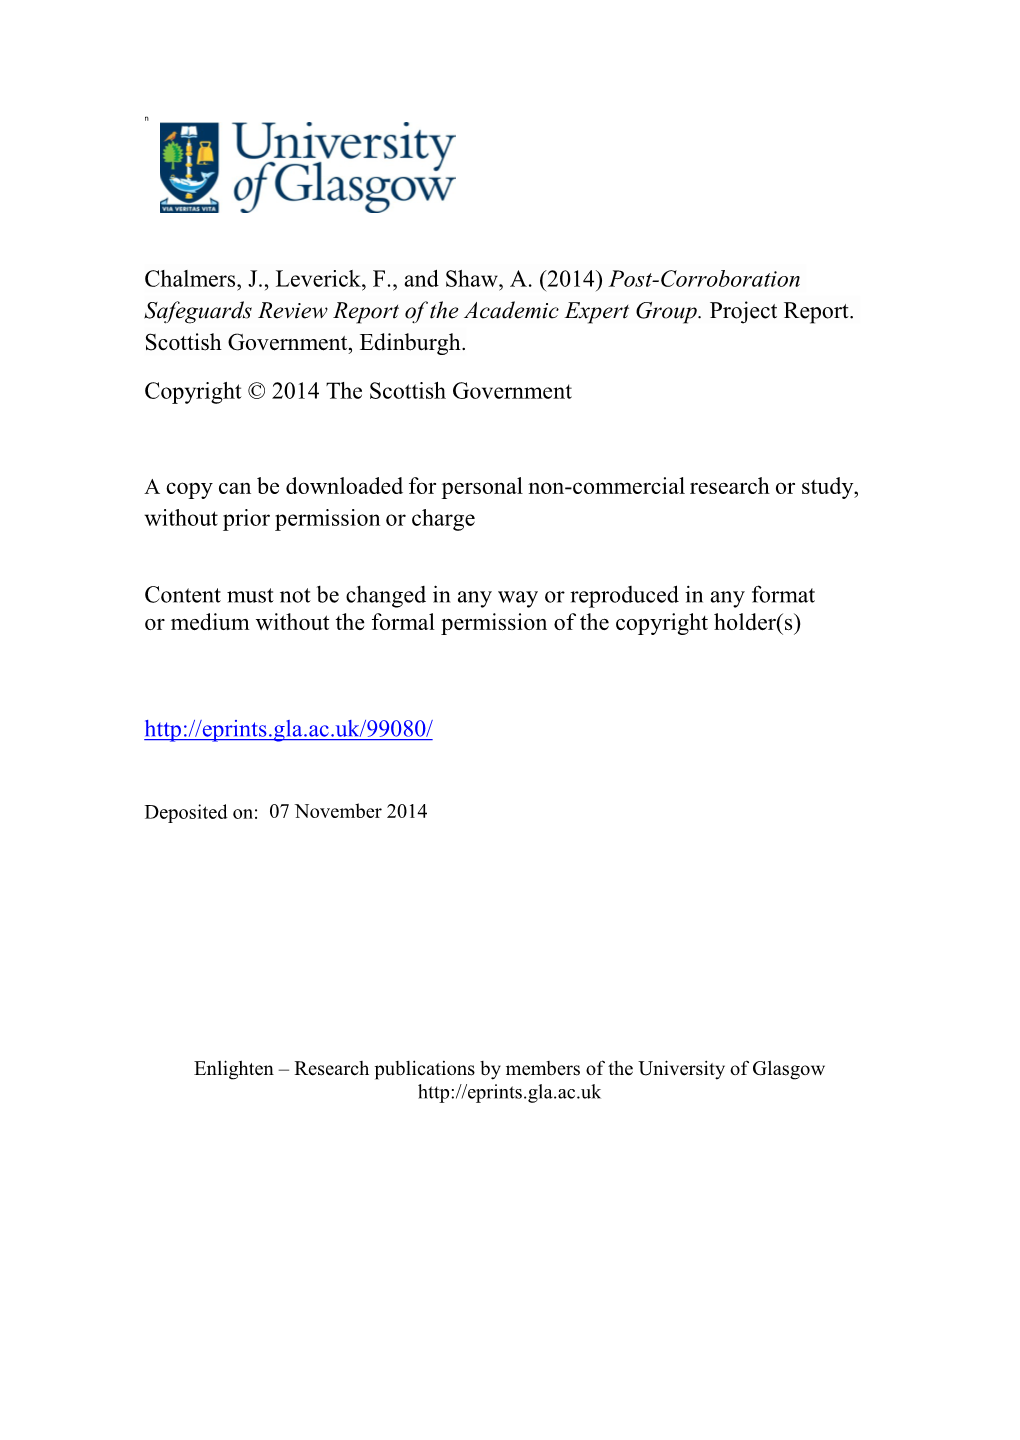 Post-Corroboration Safeguards Review Report of the Academic Expert Group. Project Report